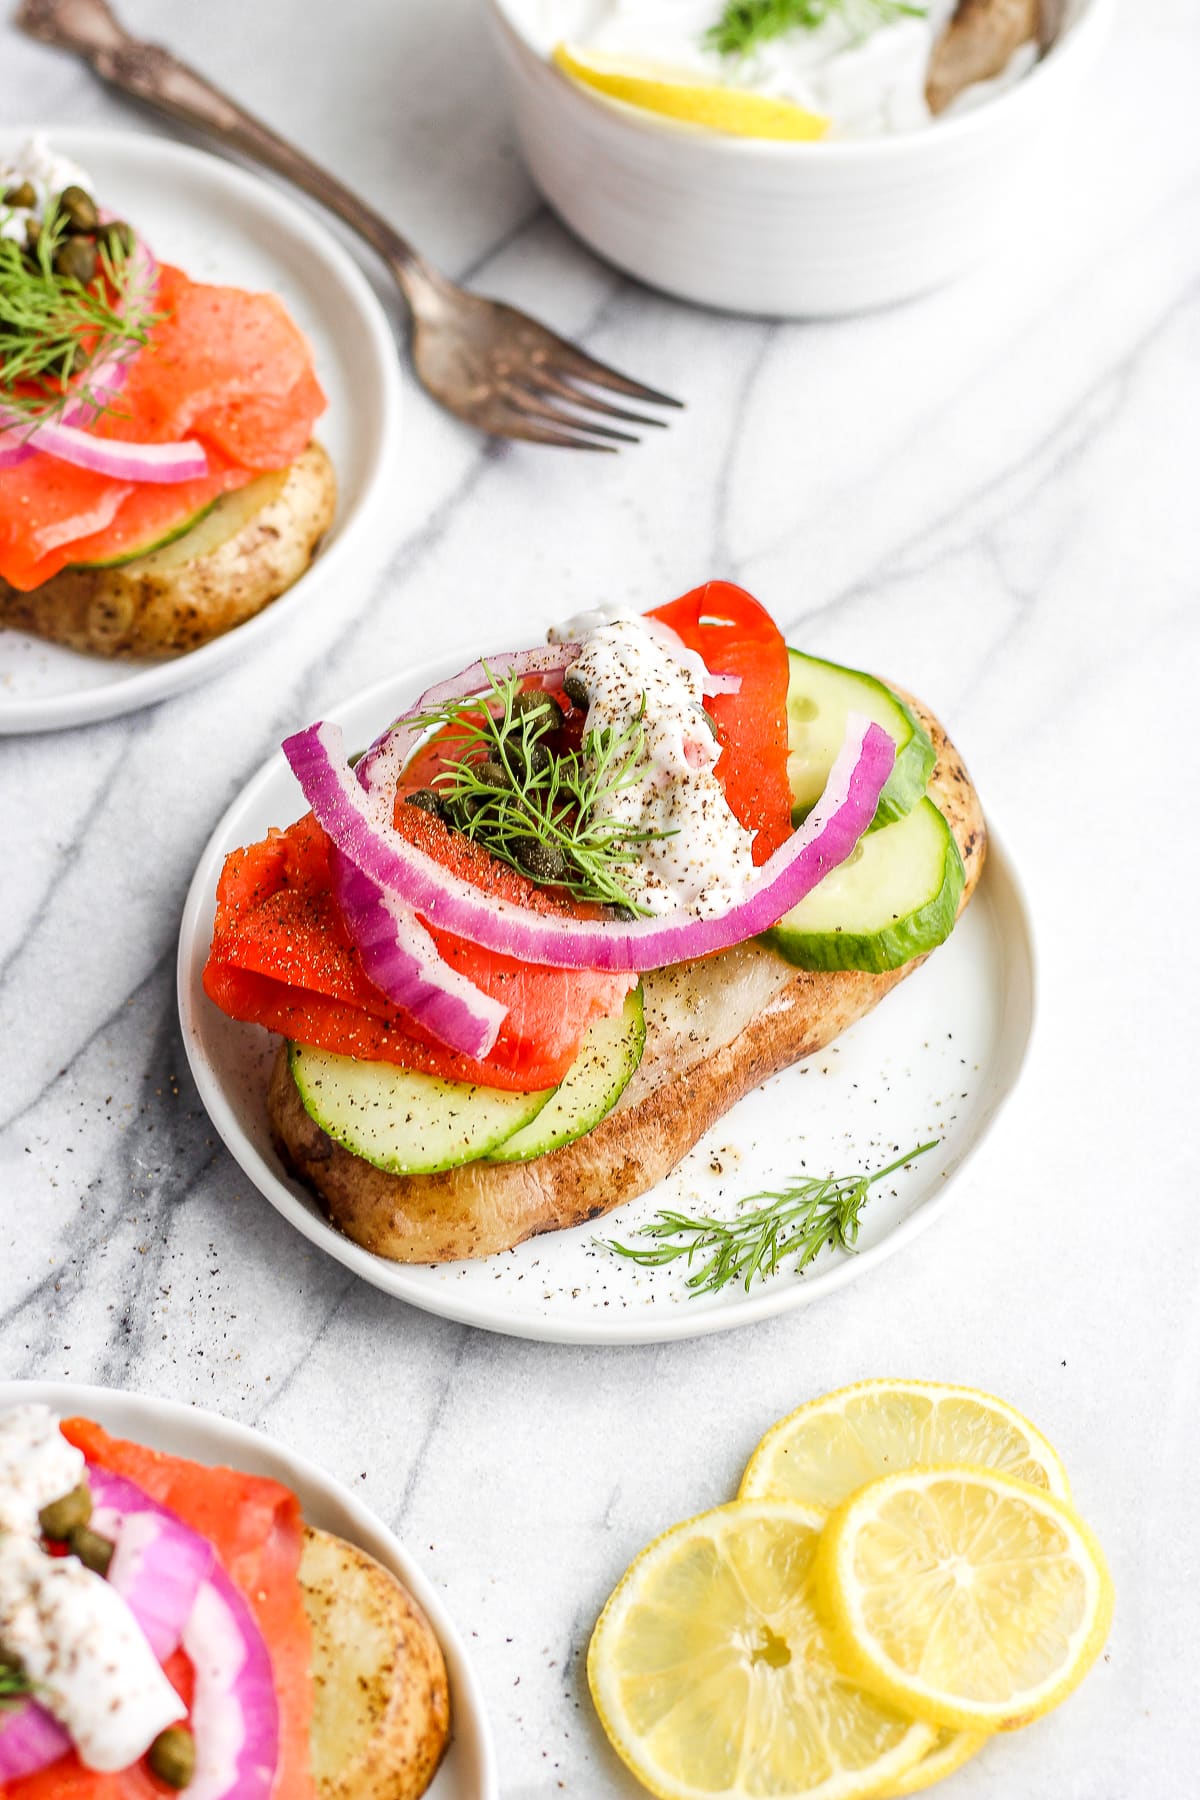 A slice of smoked salmon toast on a white plate.